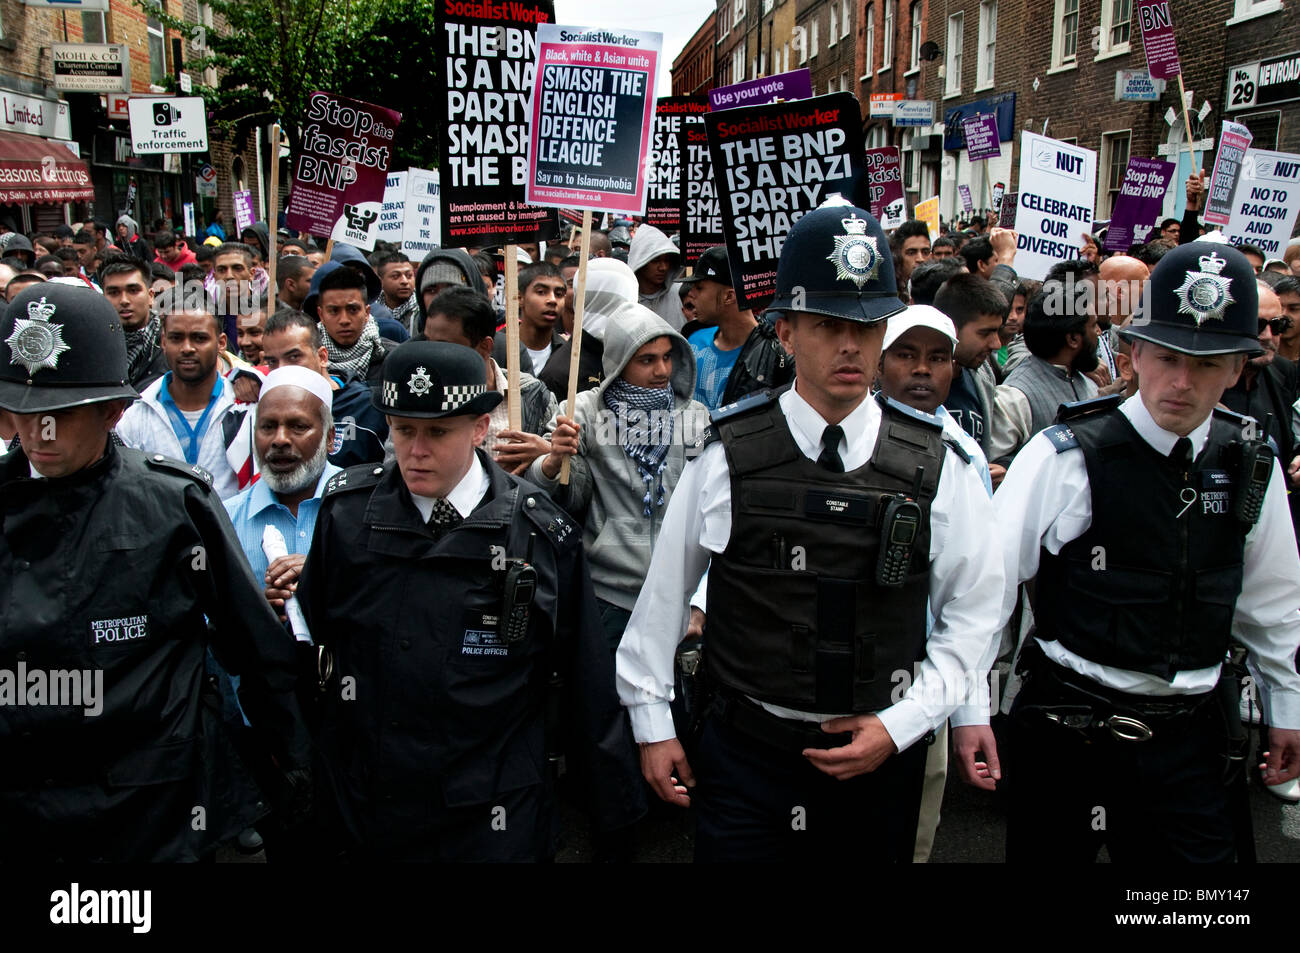 East End London march and protest against racism and fascism. Stock Photo